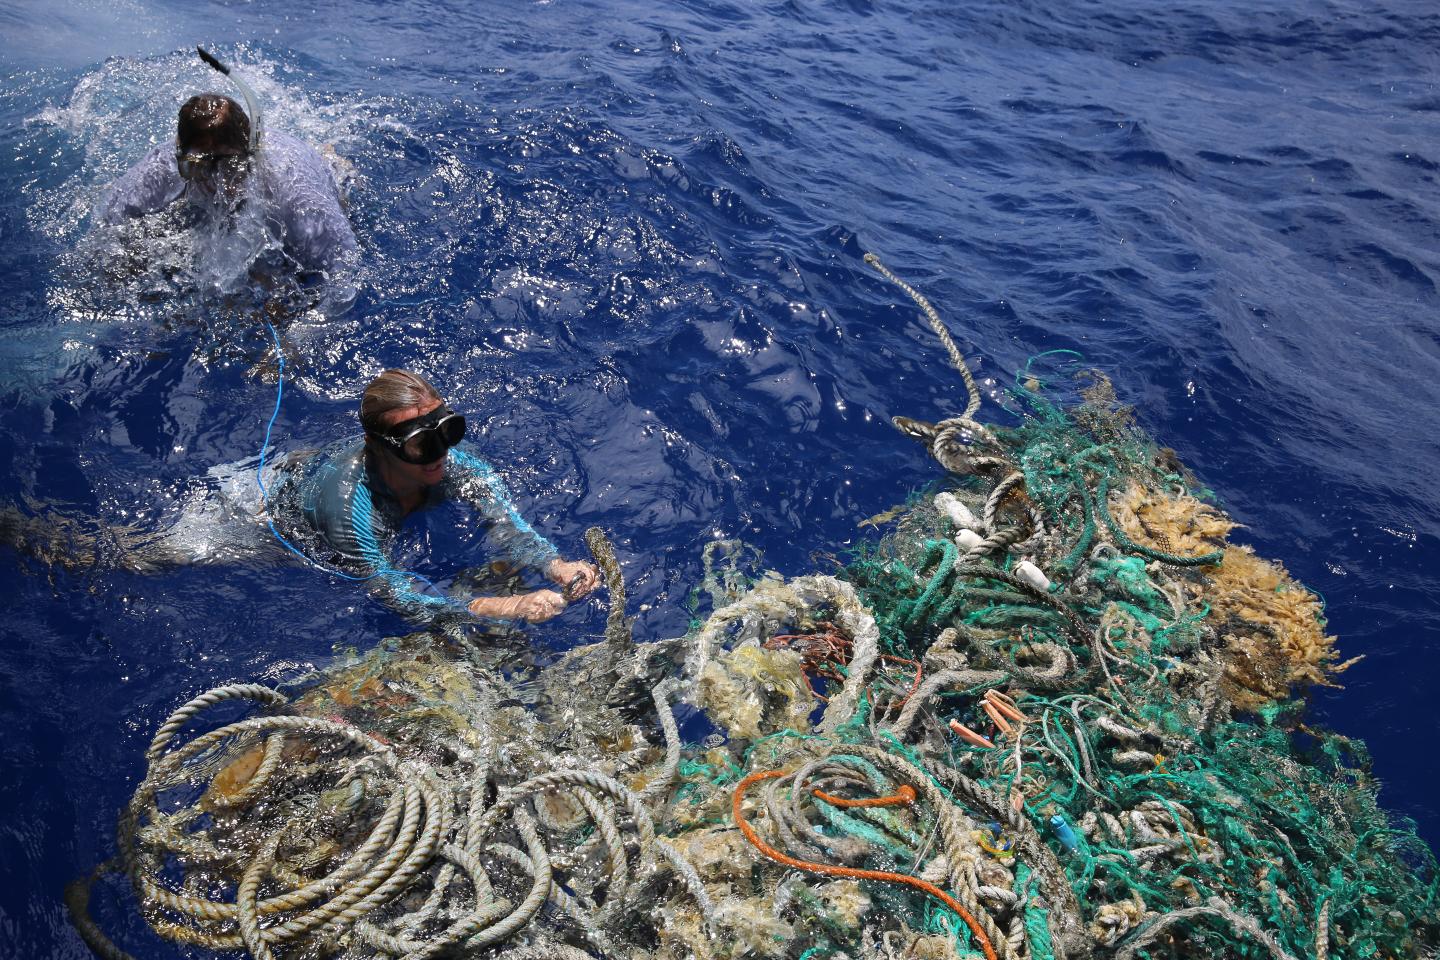 Divers in ocean next to a collection of debris